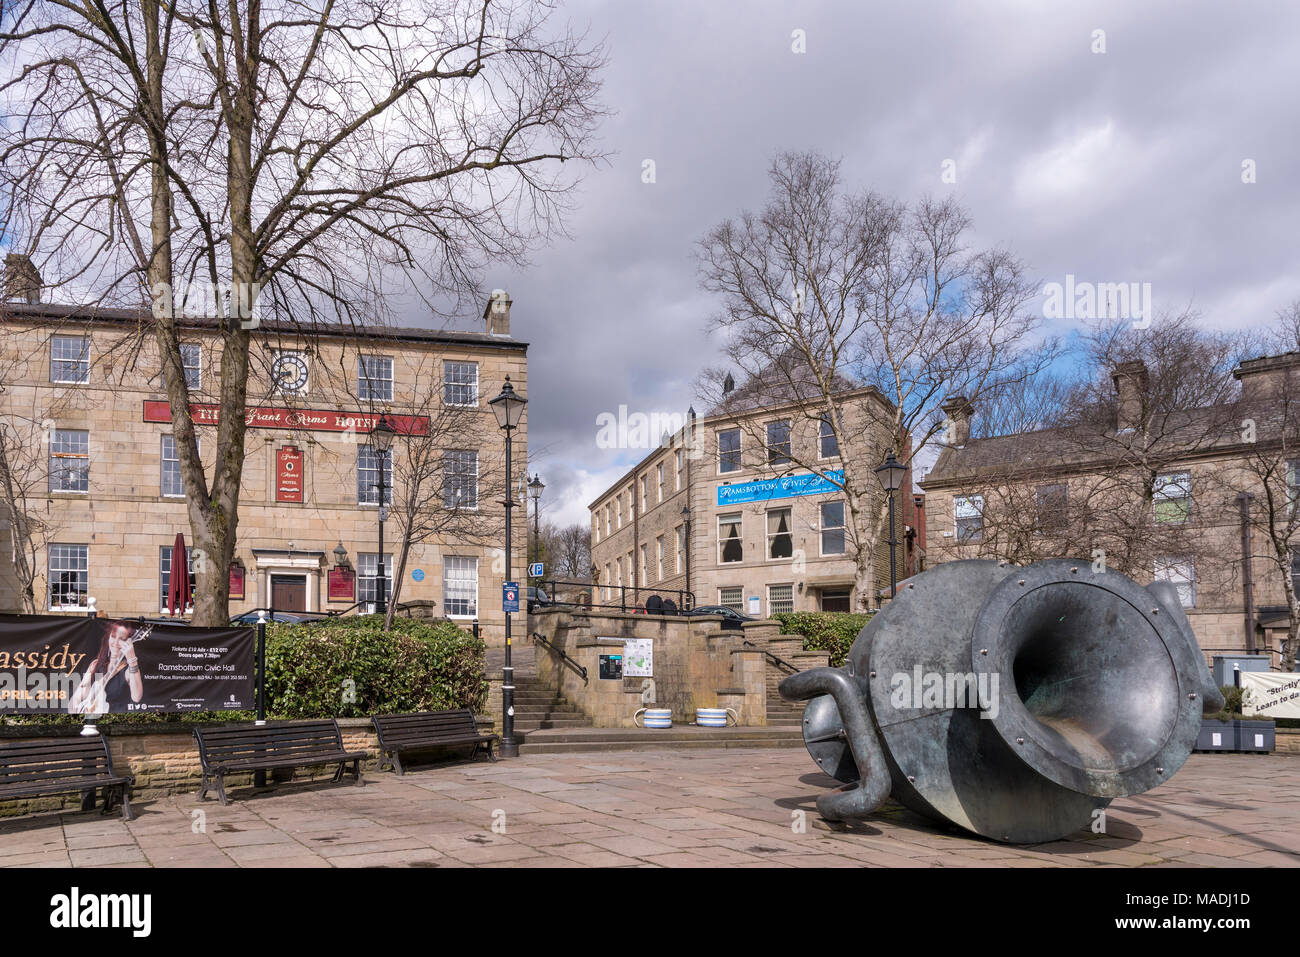 The Market Place in Ramsbottom with large water jug sculptrure part of the Irwell Valley sculpture trail. The Grant Arms hotel. Stock Photo